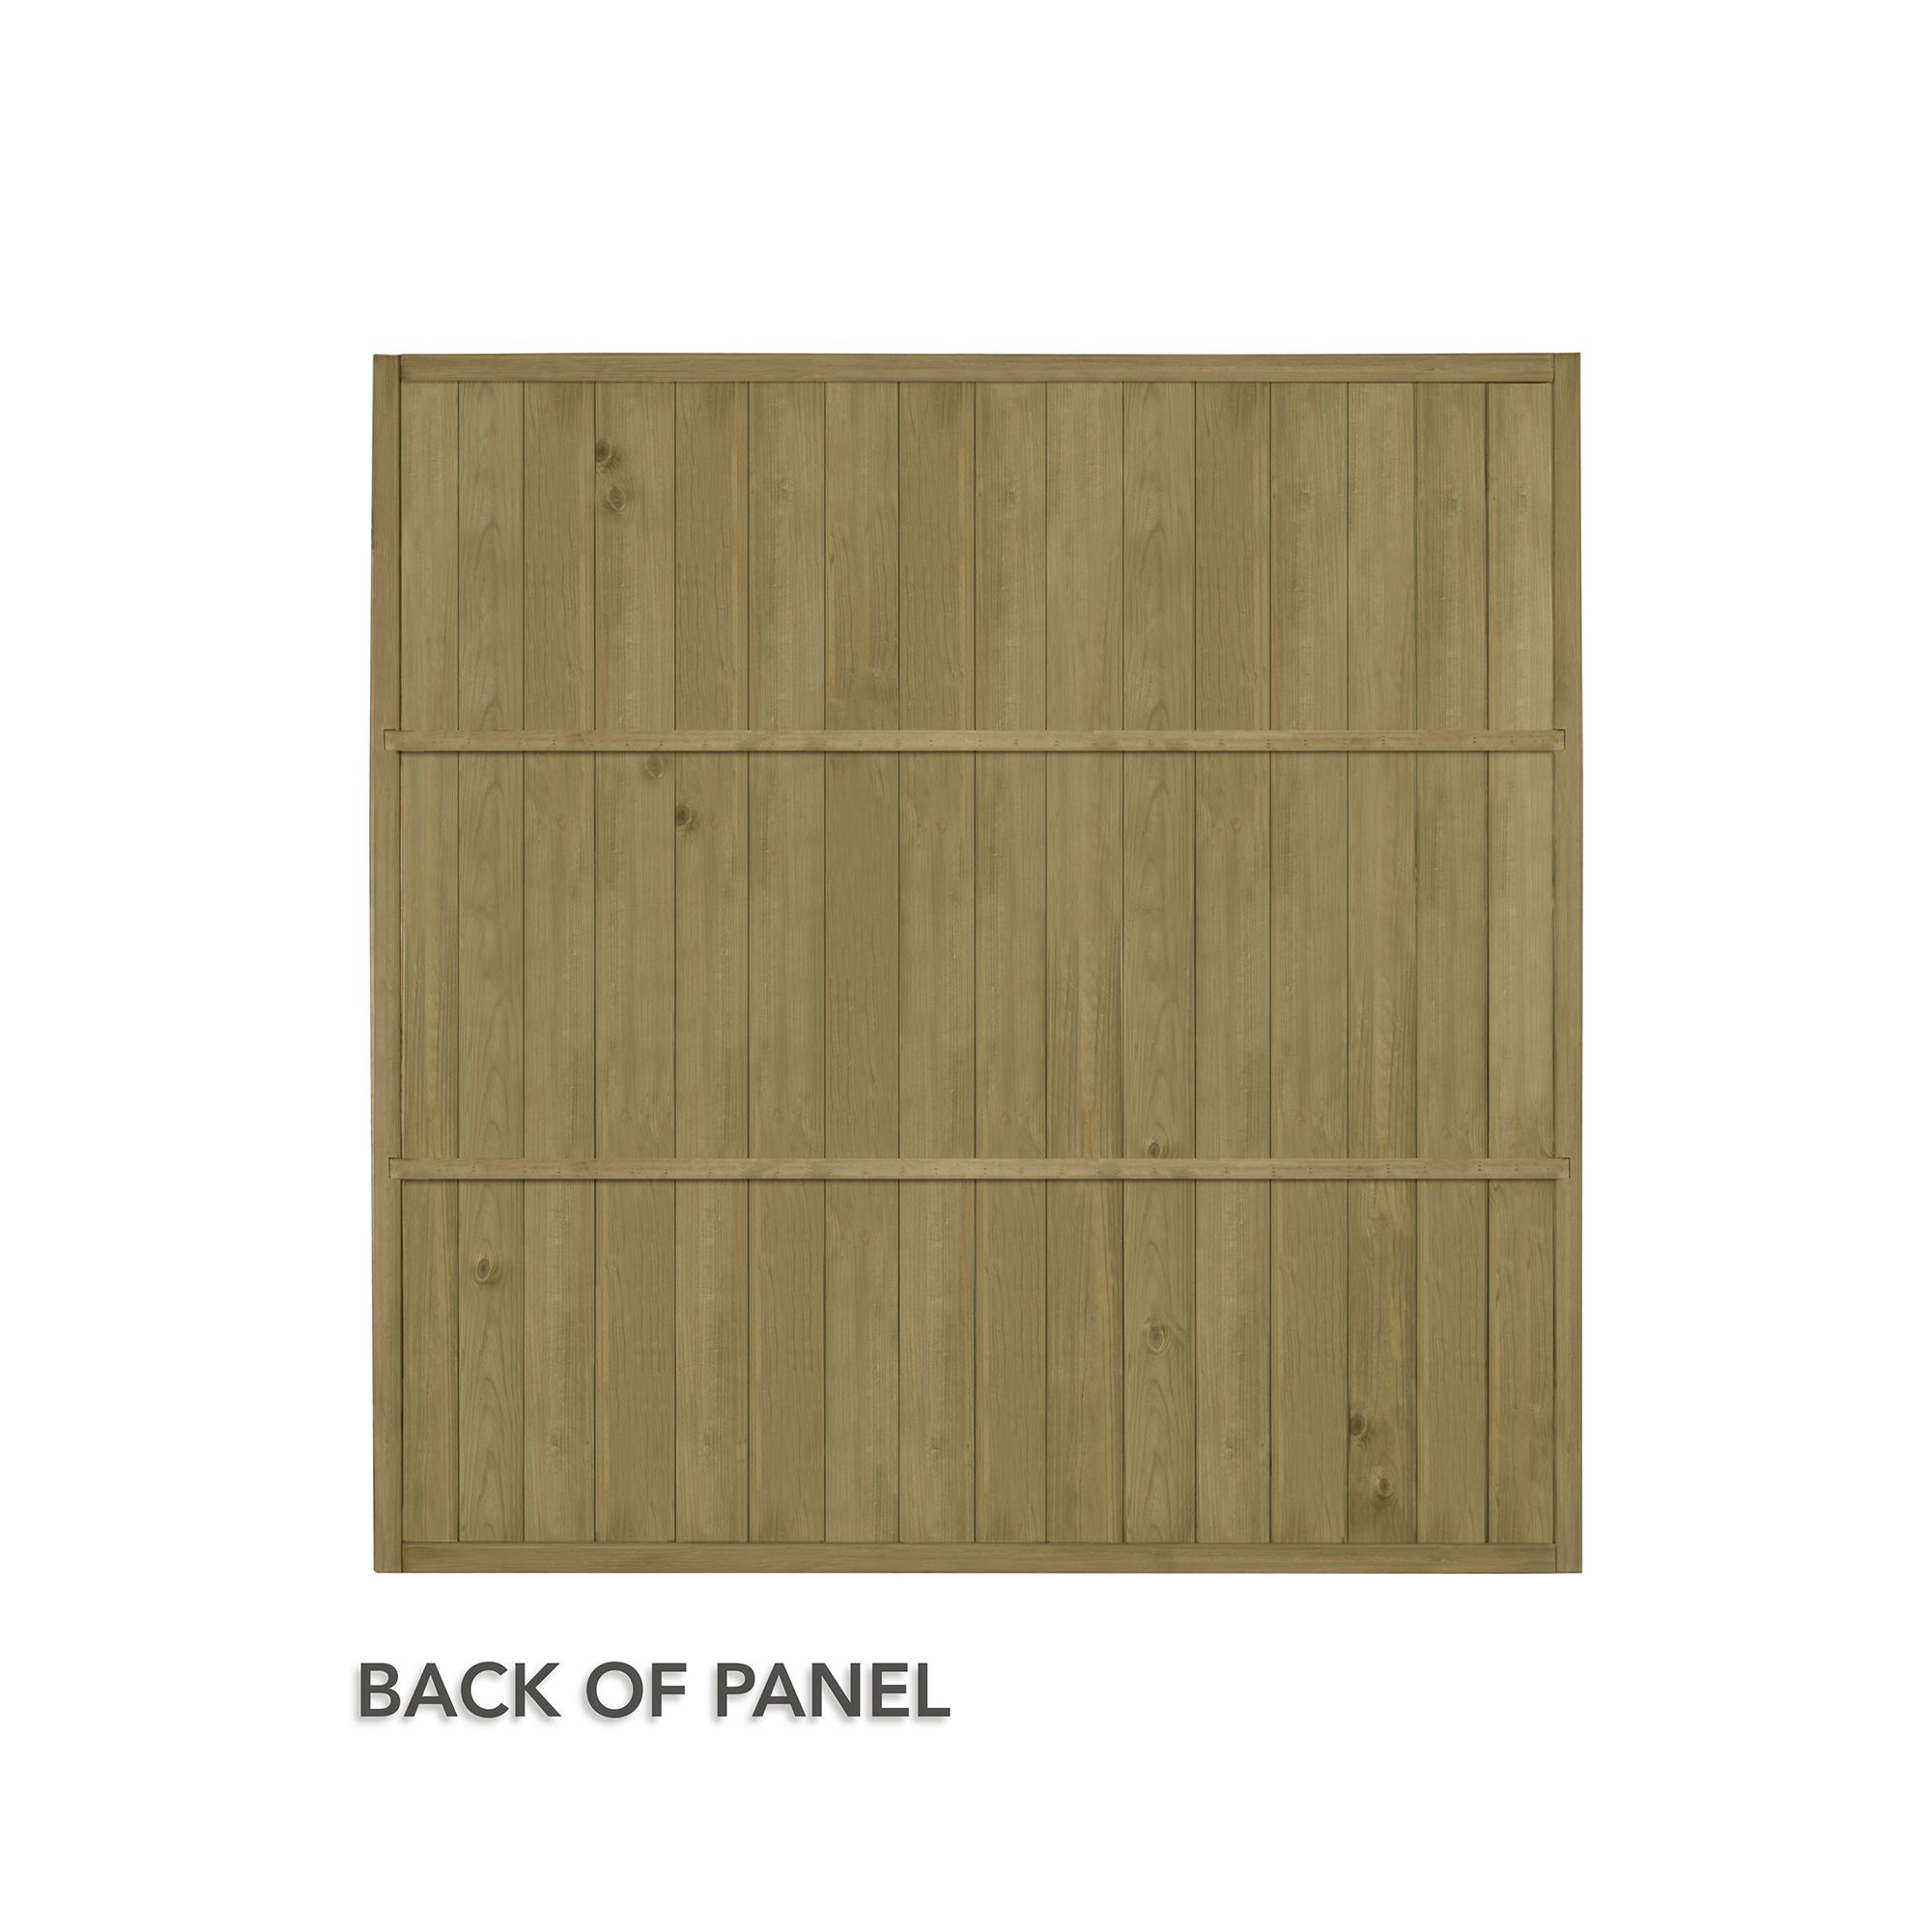 Forest Garden Traditional Tongue & groove 6ft Wooden Fence panel (W)1.83m (H)1.83m, Pack of 4